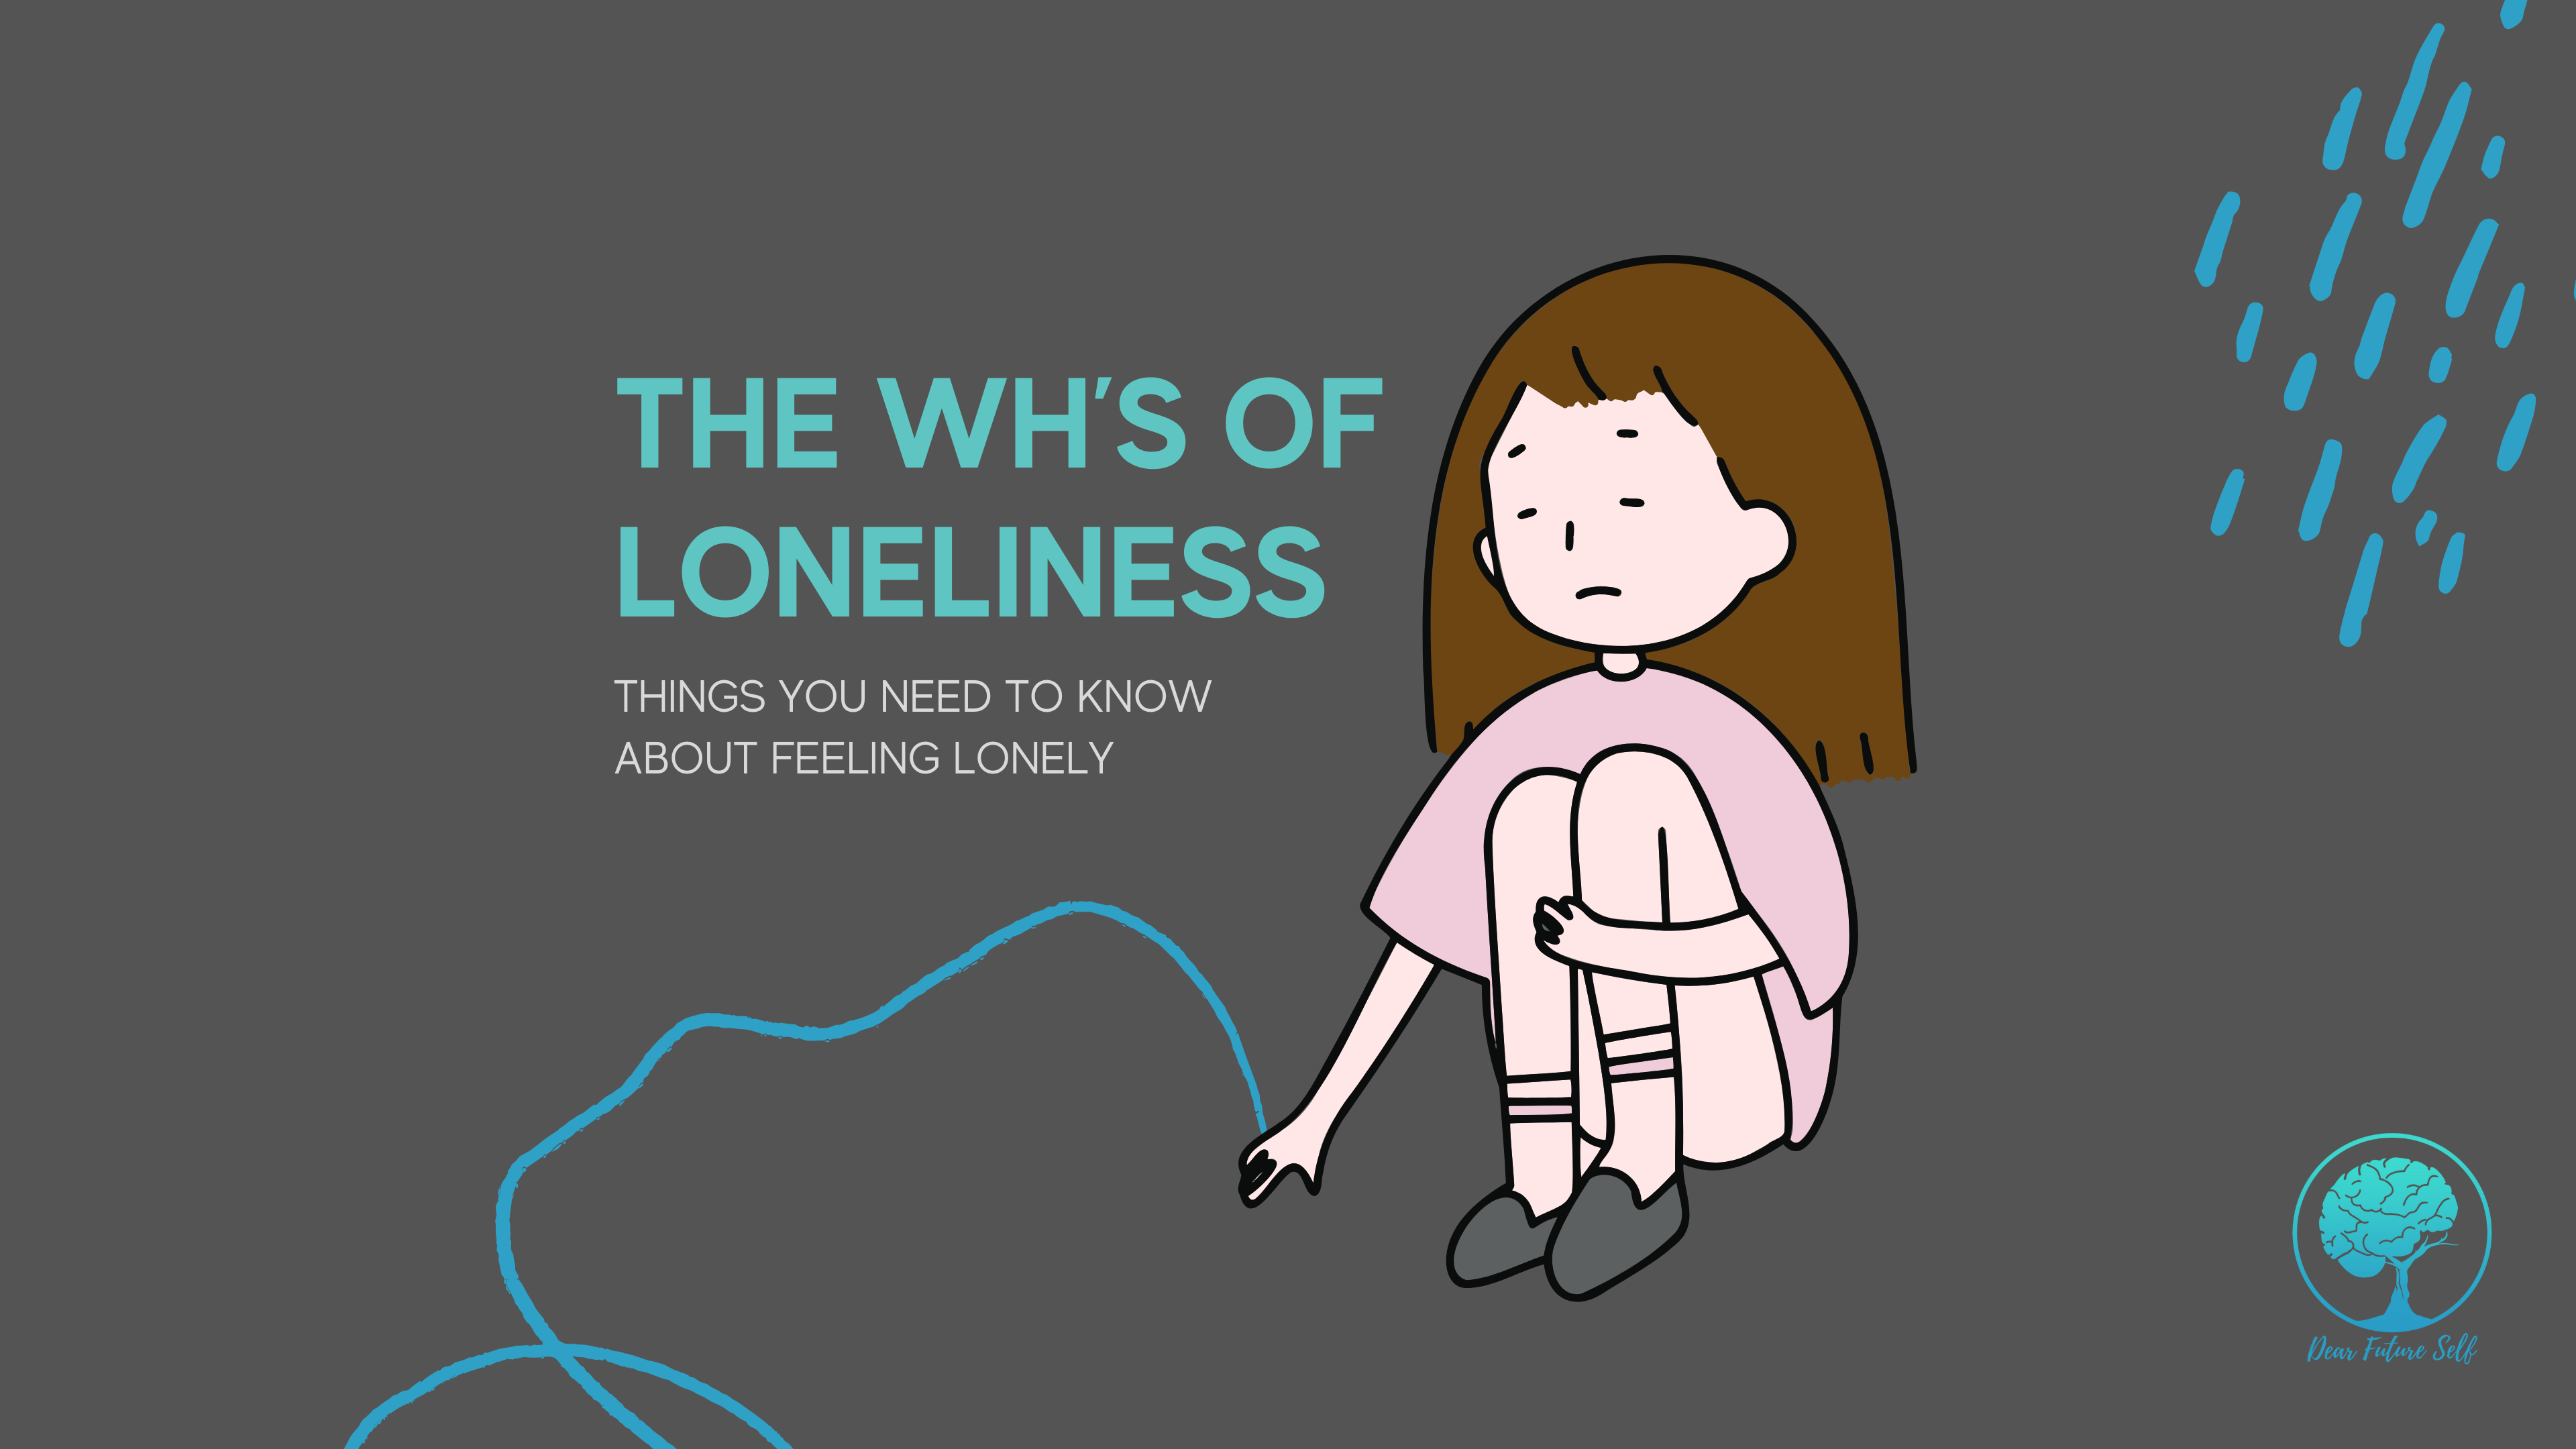 THE WH'S OF LONELINESS & HOW TO FIGHT IT - DFS Consulting